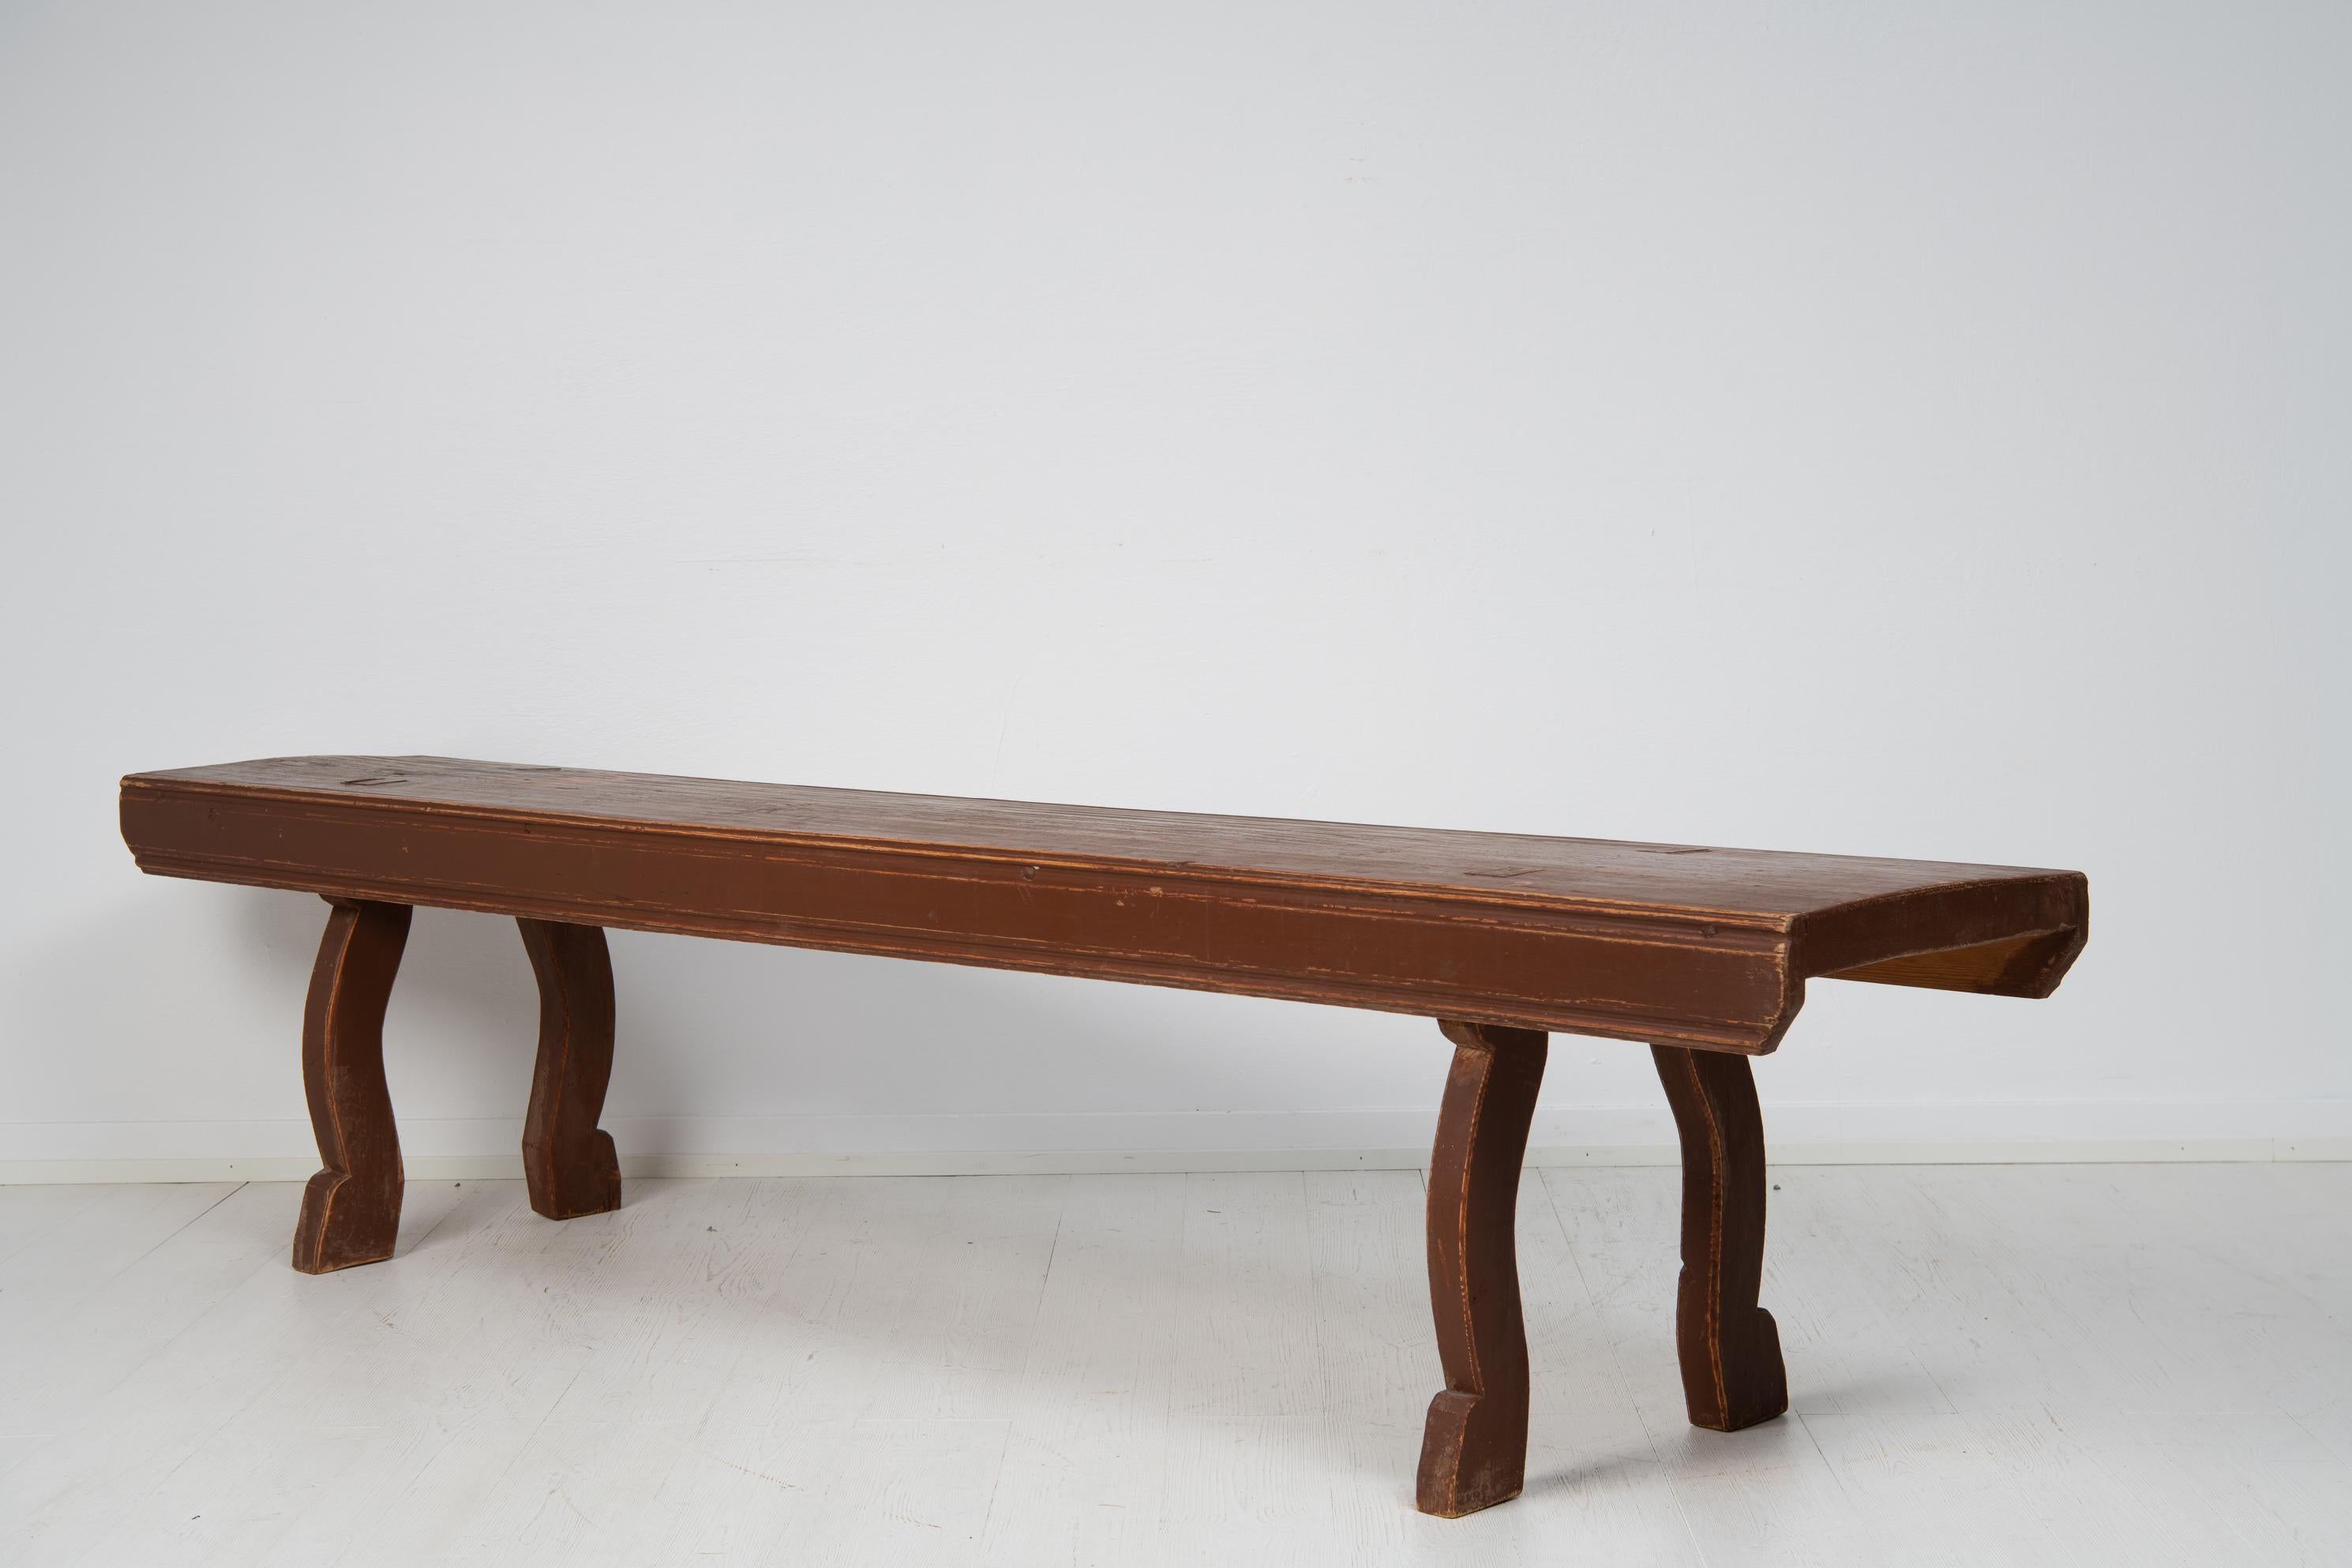 Antique Swedish country house bench made in solid pine during the mid 19th century, around 1850. The legs are curved with a simple hand-carved detail above the foot. The side of the bench has an extra profiling, or small flutes, running along the